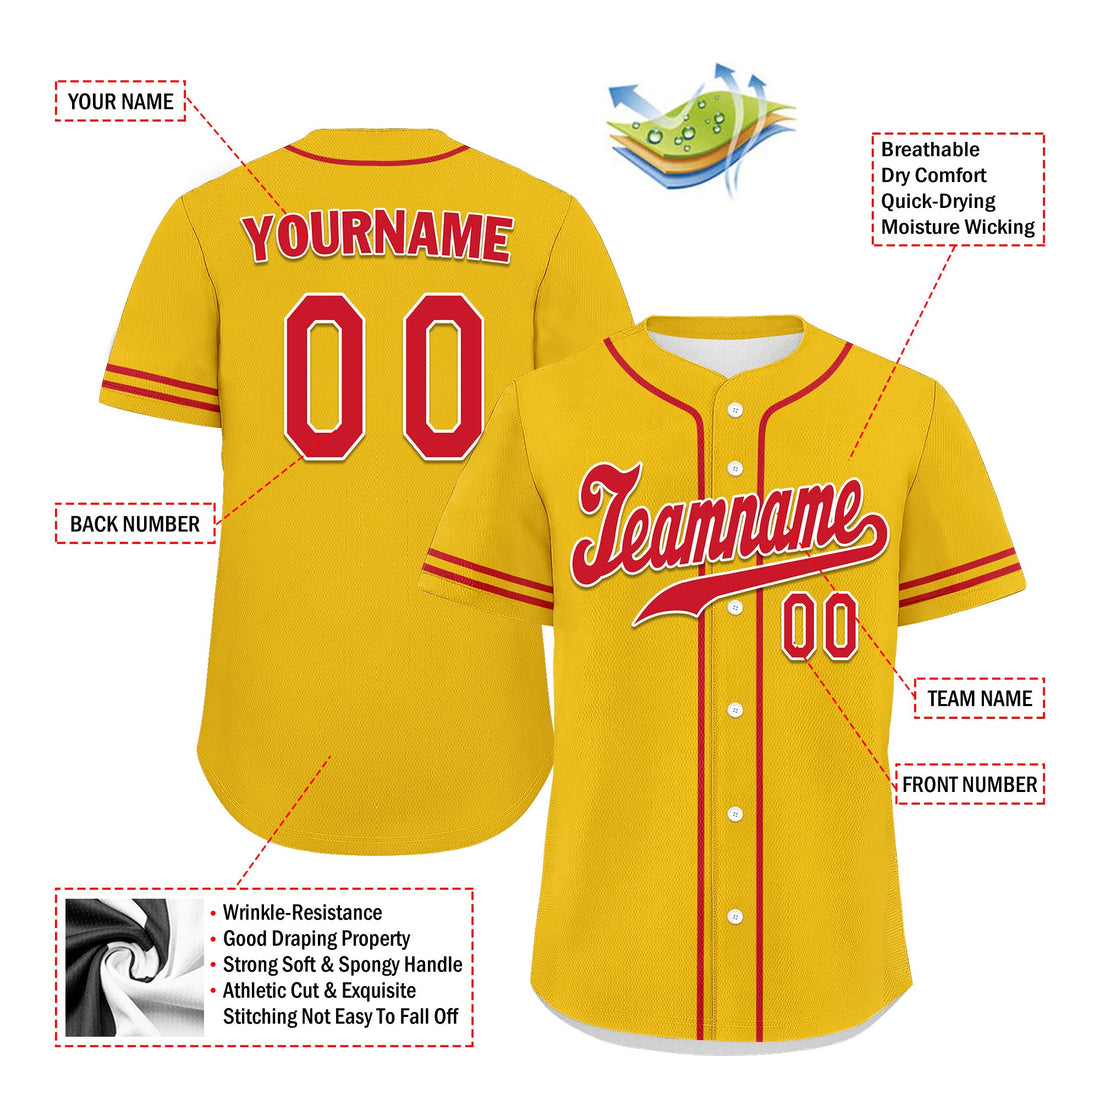 Custom Yellow Classic Style Red Personalized Authentic Baseball Jersey UN002-bd0b00d8-8